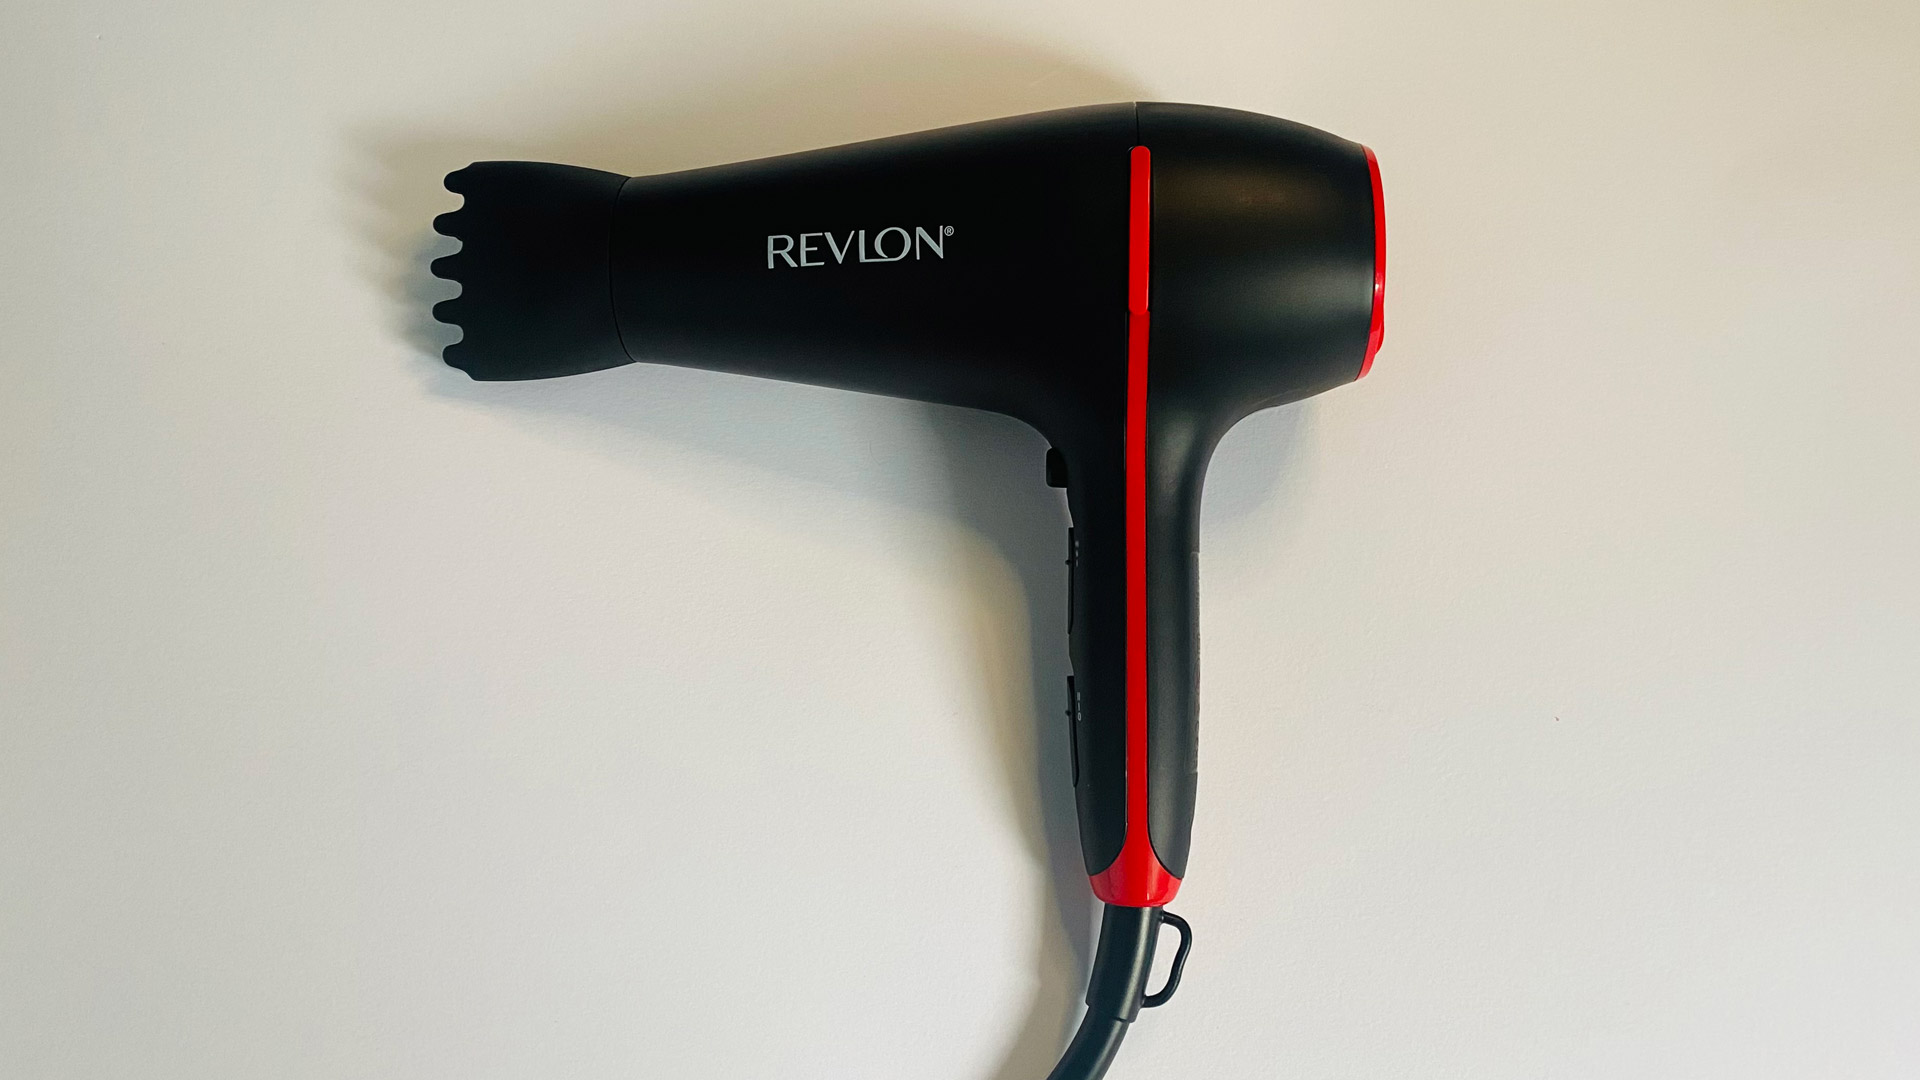 Revlon SmoothStay Coconut-Oil Infused Hair Dryer with smoothing concentrator